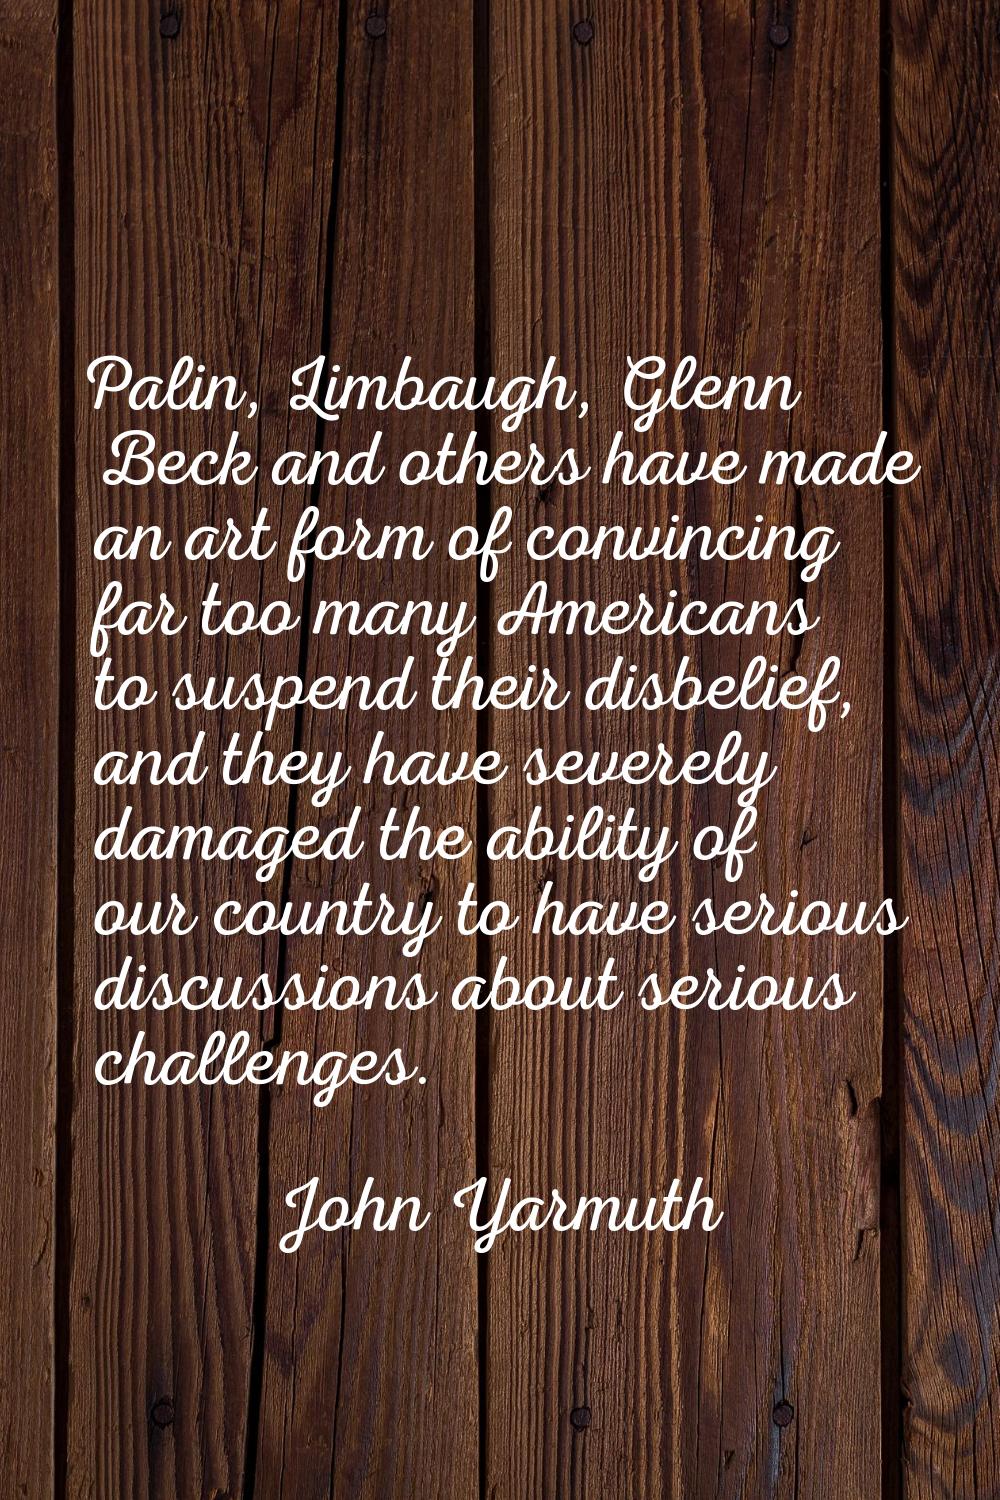 Palin, Limbaugh, Glenn Beck and others have made an art form of convincing far too many Americans t